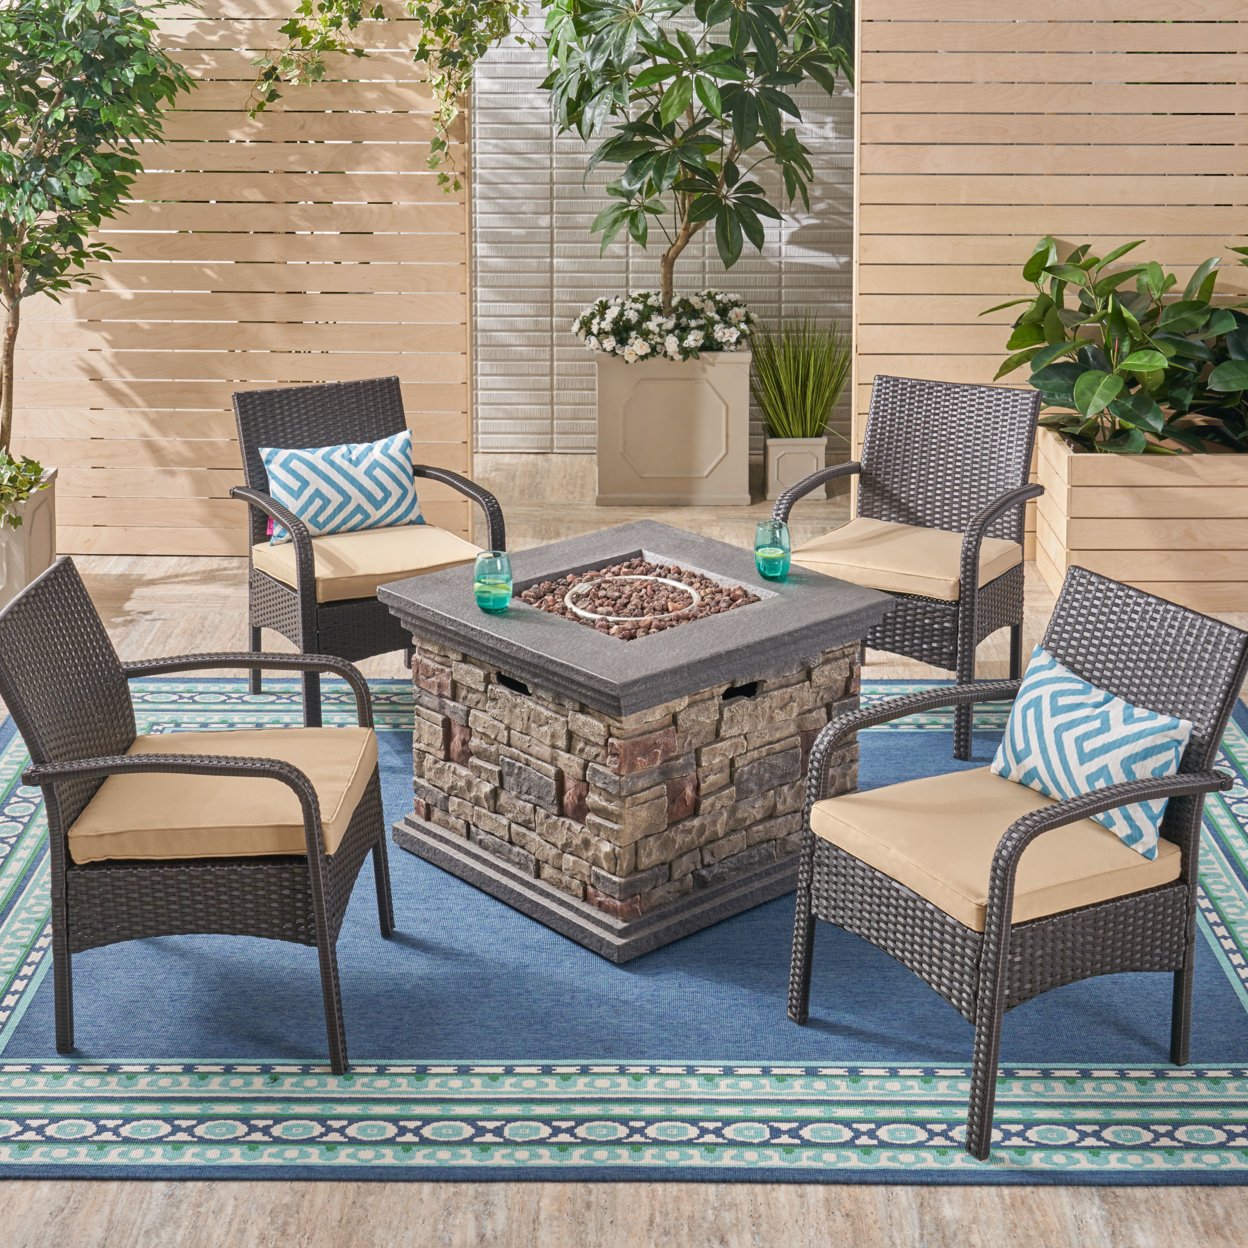 Meroy Patio Fire Pit Set, 4-Seater With Club Chairs, Wicker With Outdoor Cushions - Brown / Tan / Stone